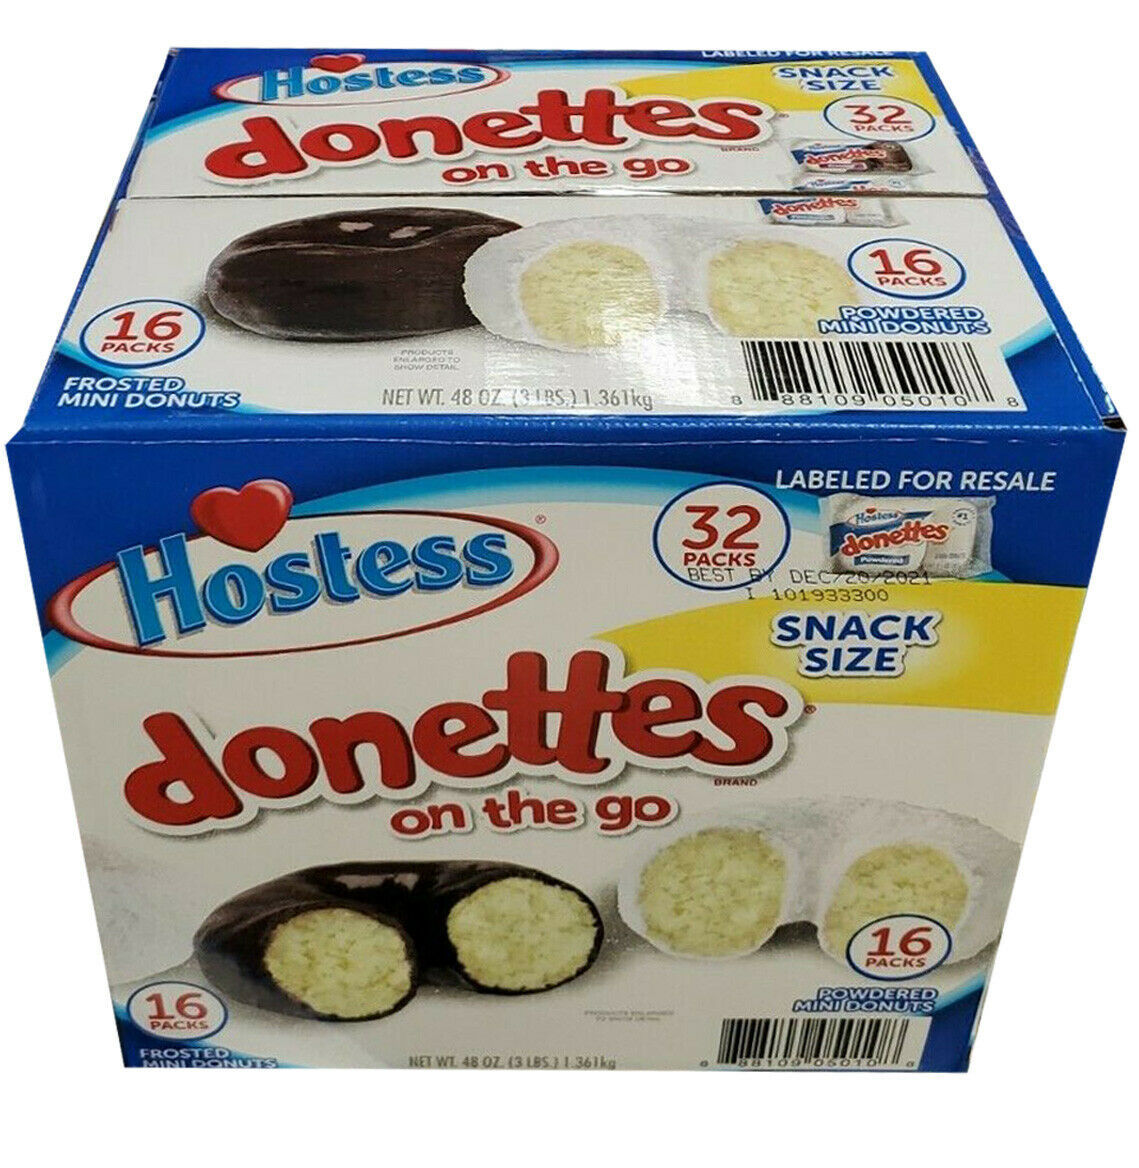  Hostess Mini Powered Donettes and Frosted Chocolate Mini Donettes 32 CT 48 oz - $24.31